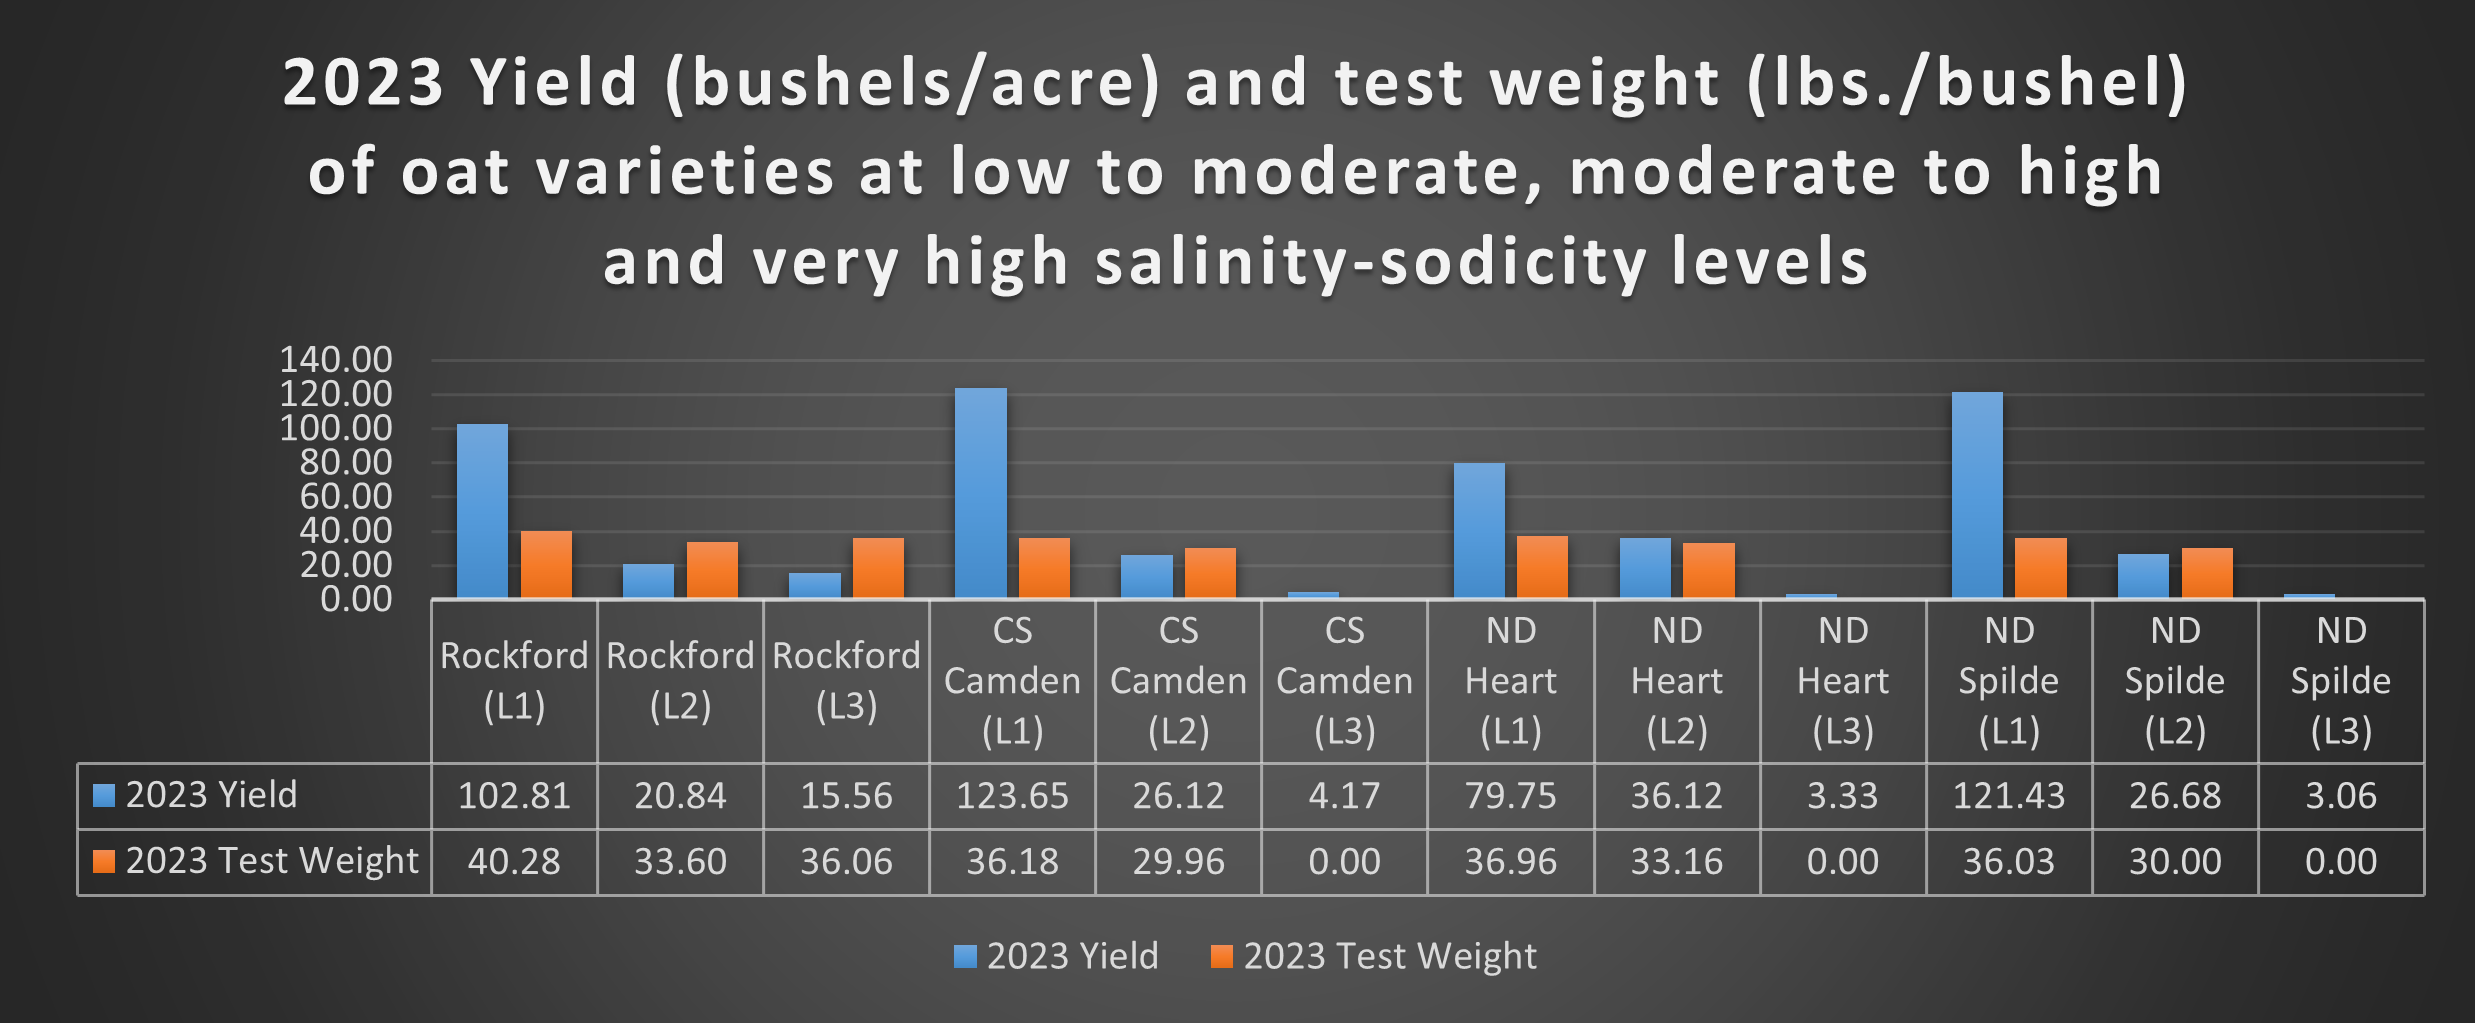 2023 yield and test weight of four oat varieties.